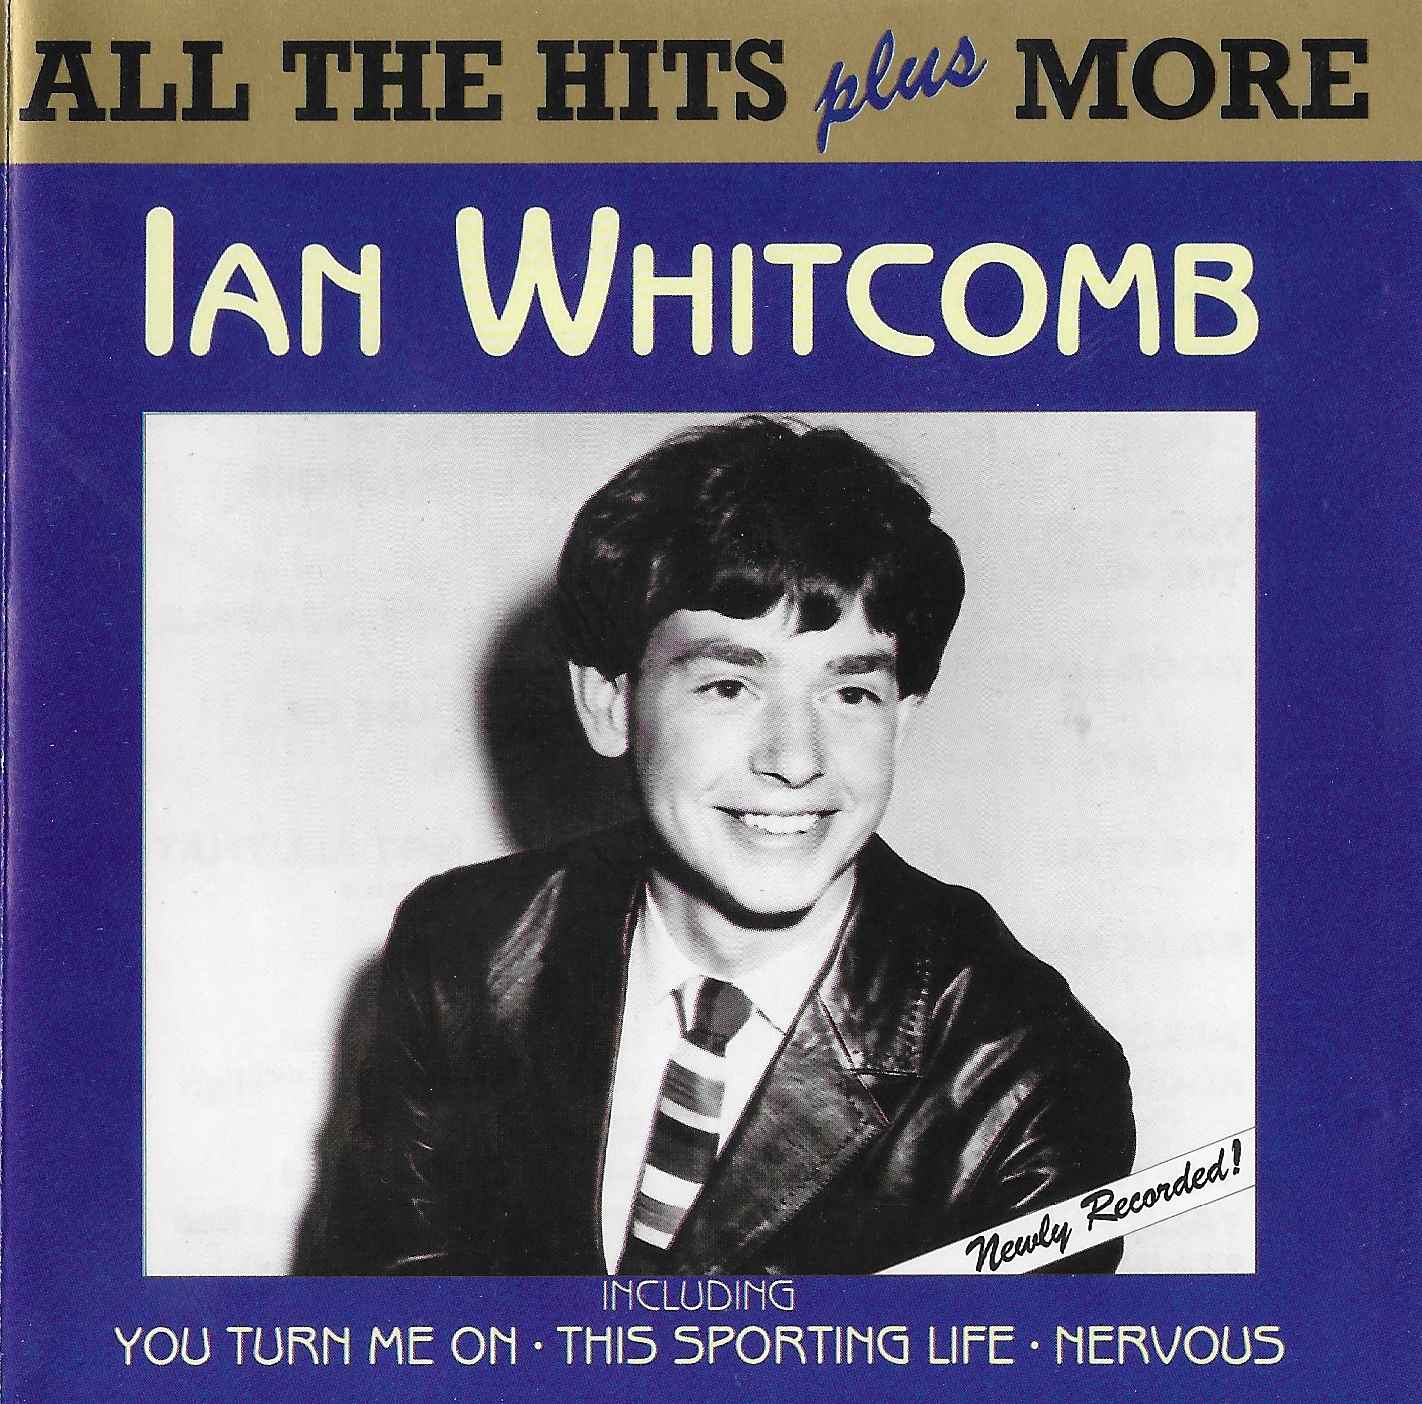 Picture of CDPT 005 All the hits plus more by artist Ian Whitcomb from the BBC cds - Records and Tapes library